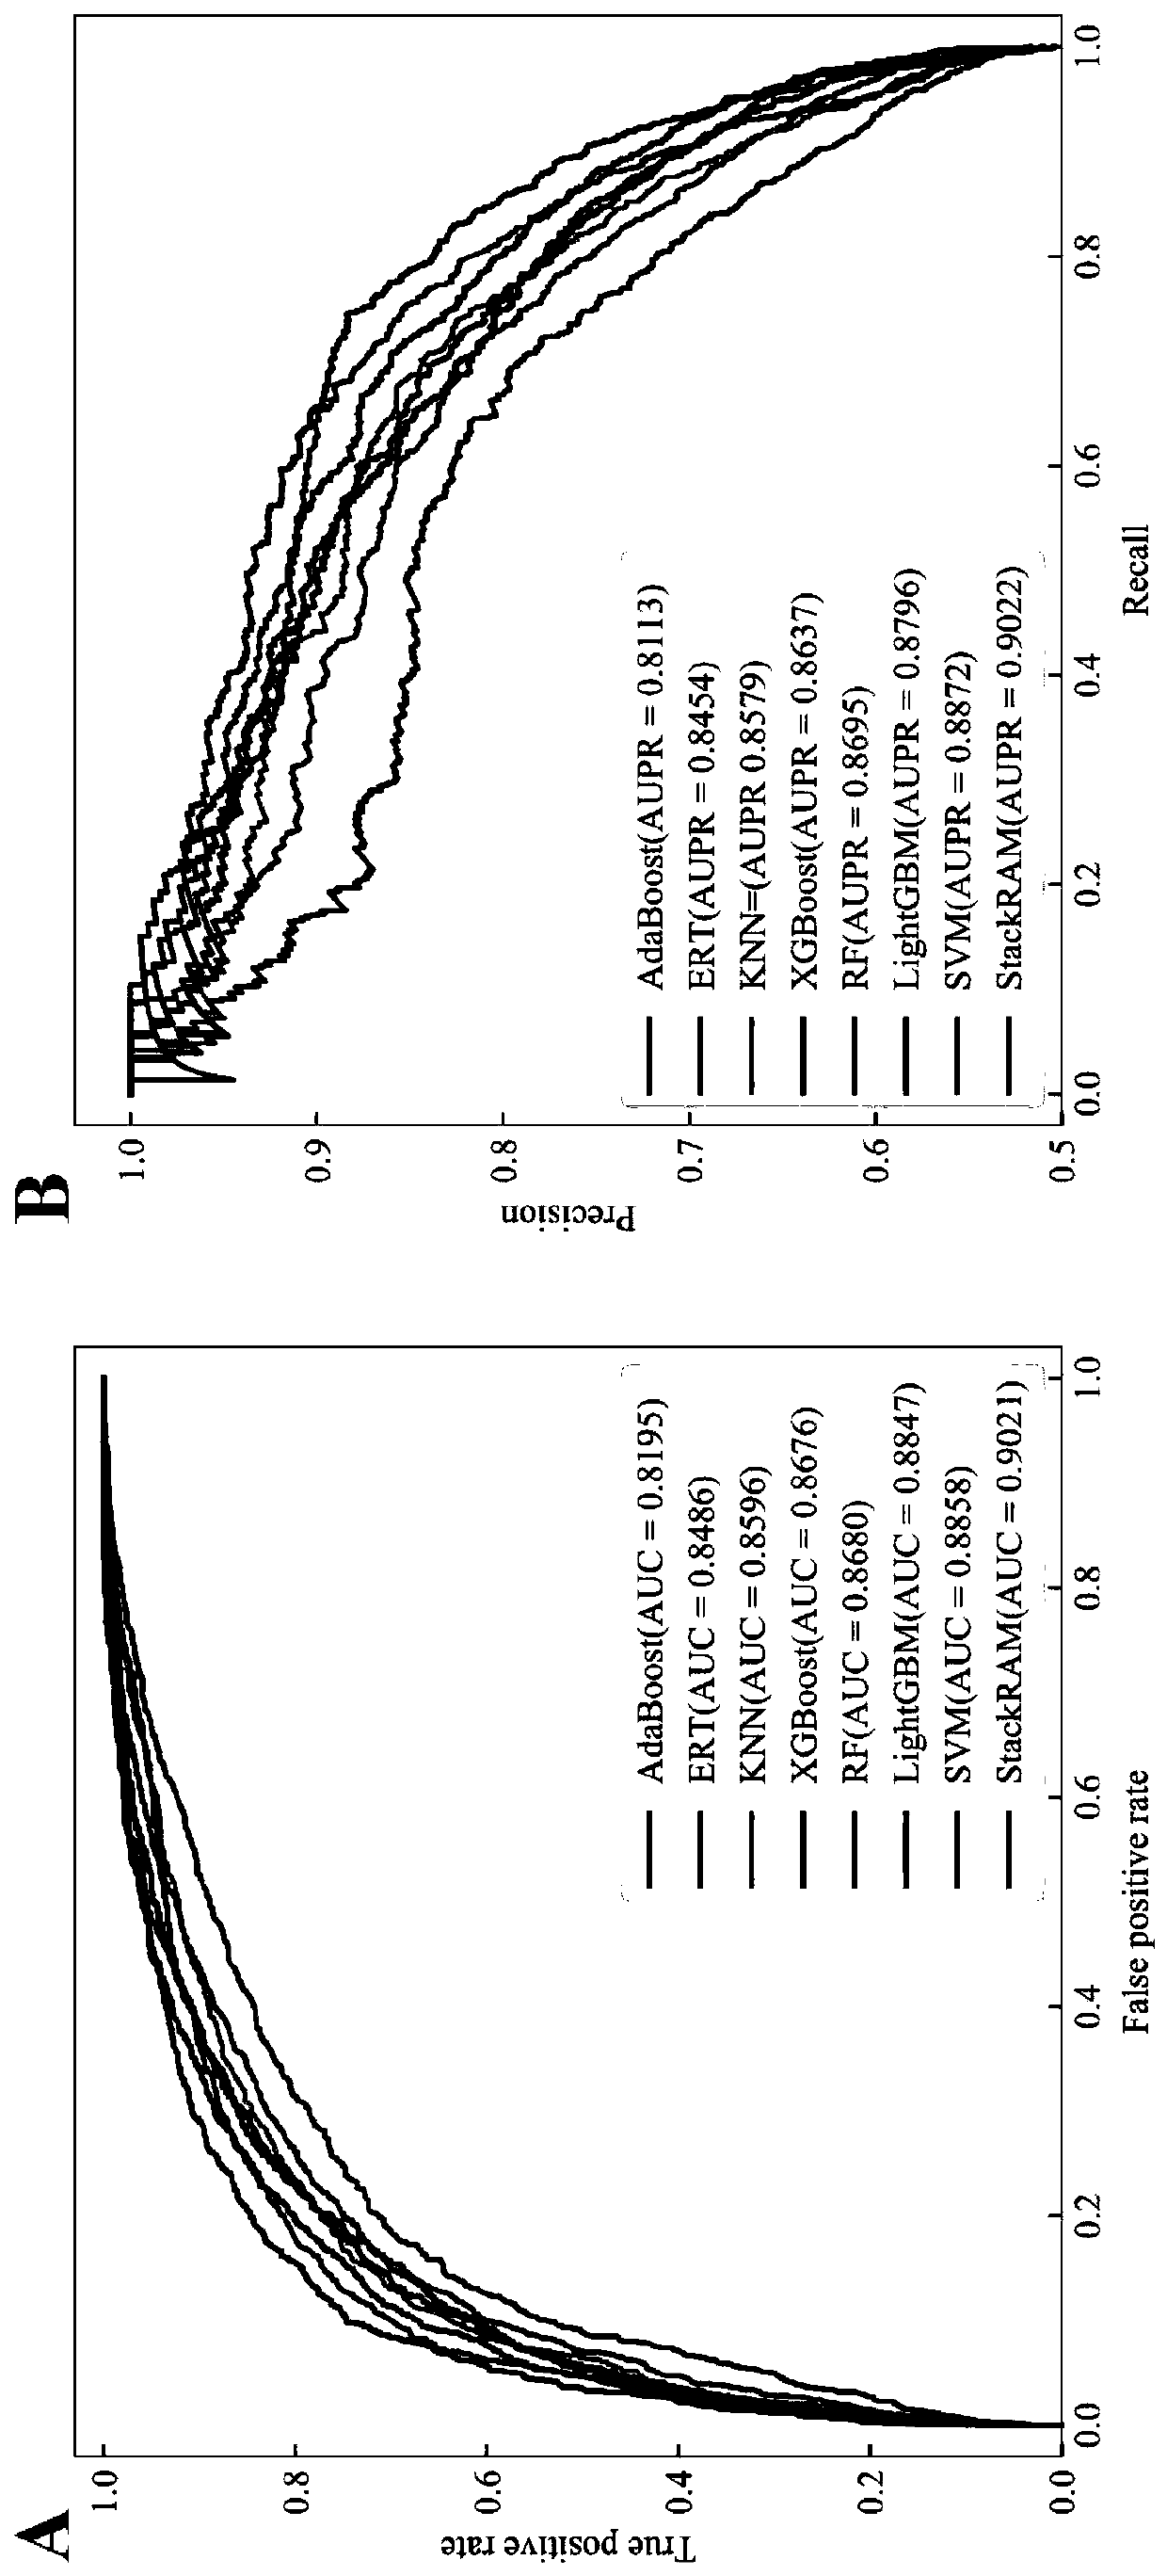 Method for predicting N6-methyladenosine modification site in RNA based on stacking integration